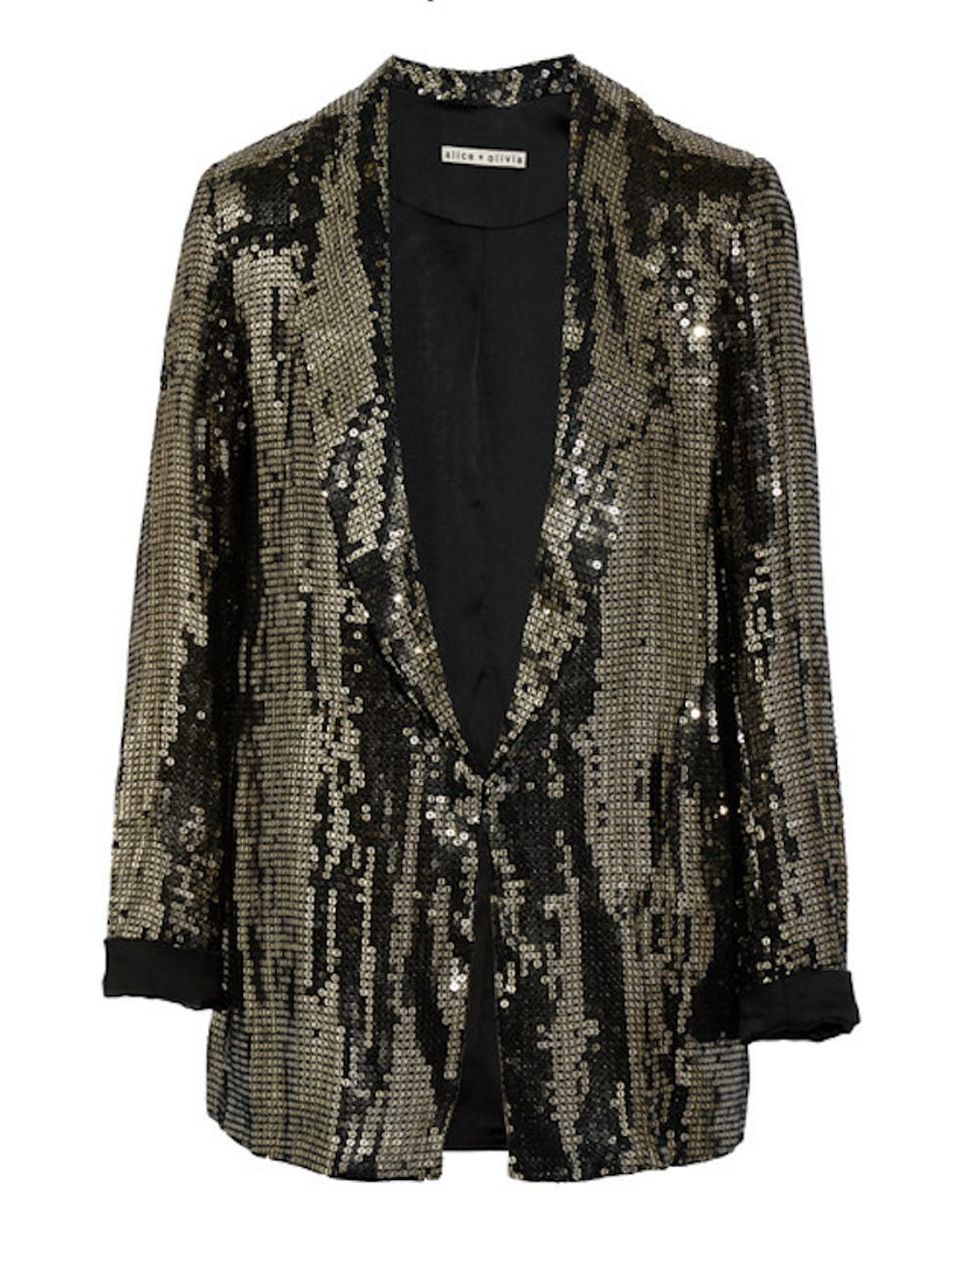 How to Wear the Celebrity-Approved Sequin Party Jacket Trend This ...